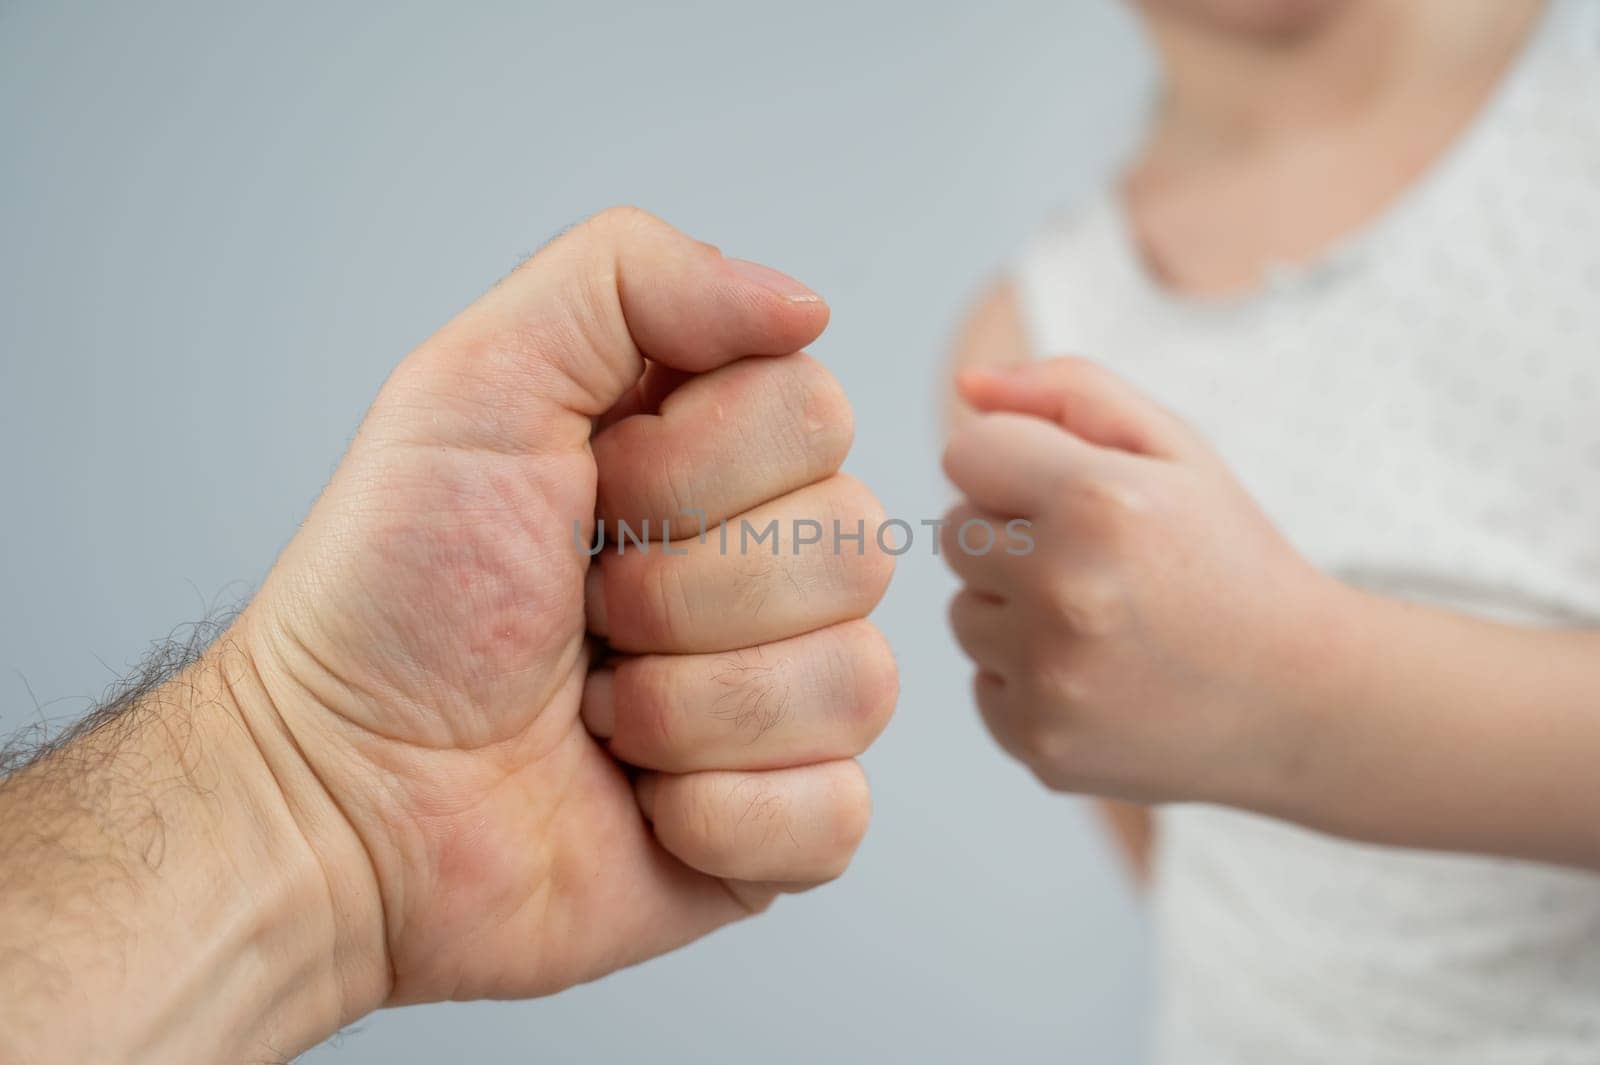 Little Caucasian girl fist bumping with dad on white background